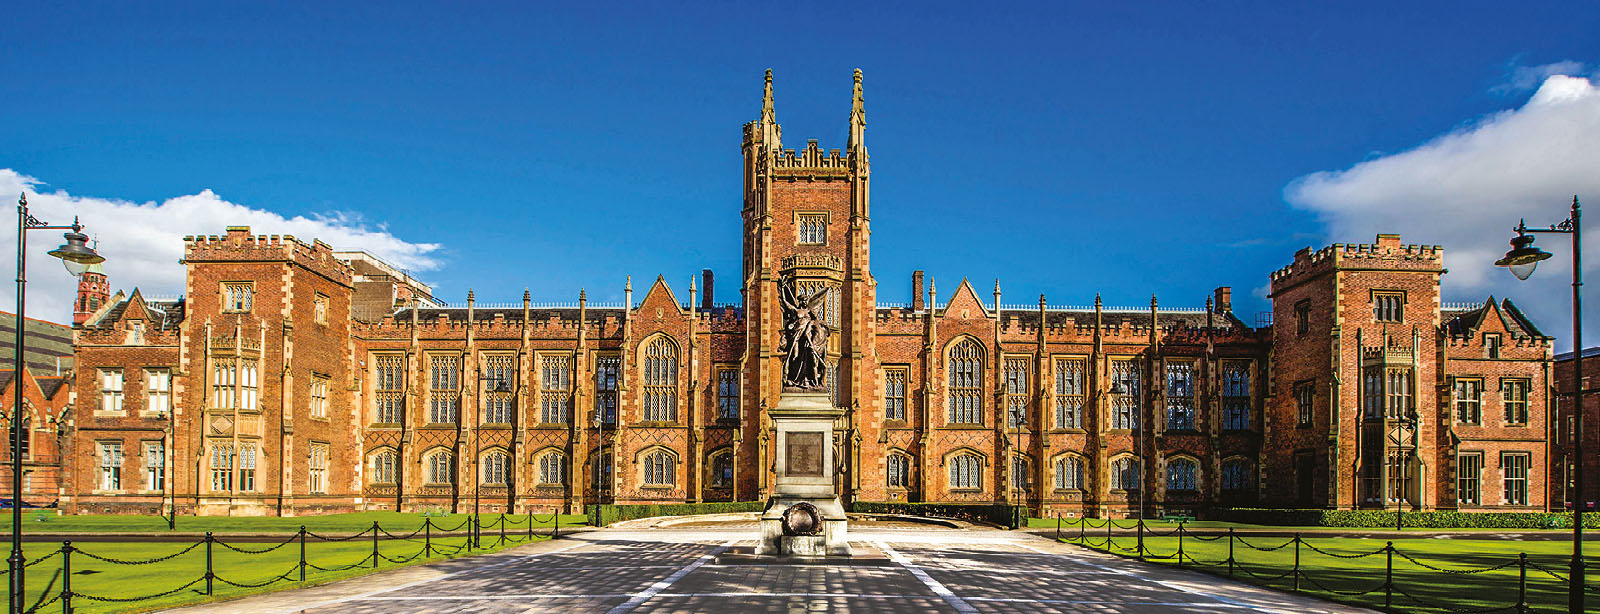 11 Reasons International Students Choose Queen’s University Belfast for Studying Abroad!